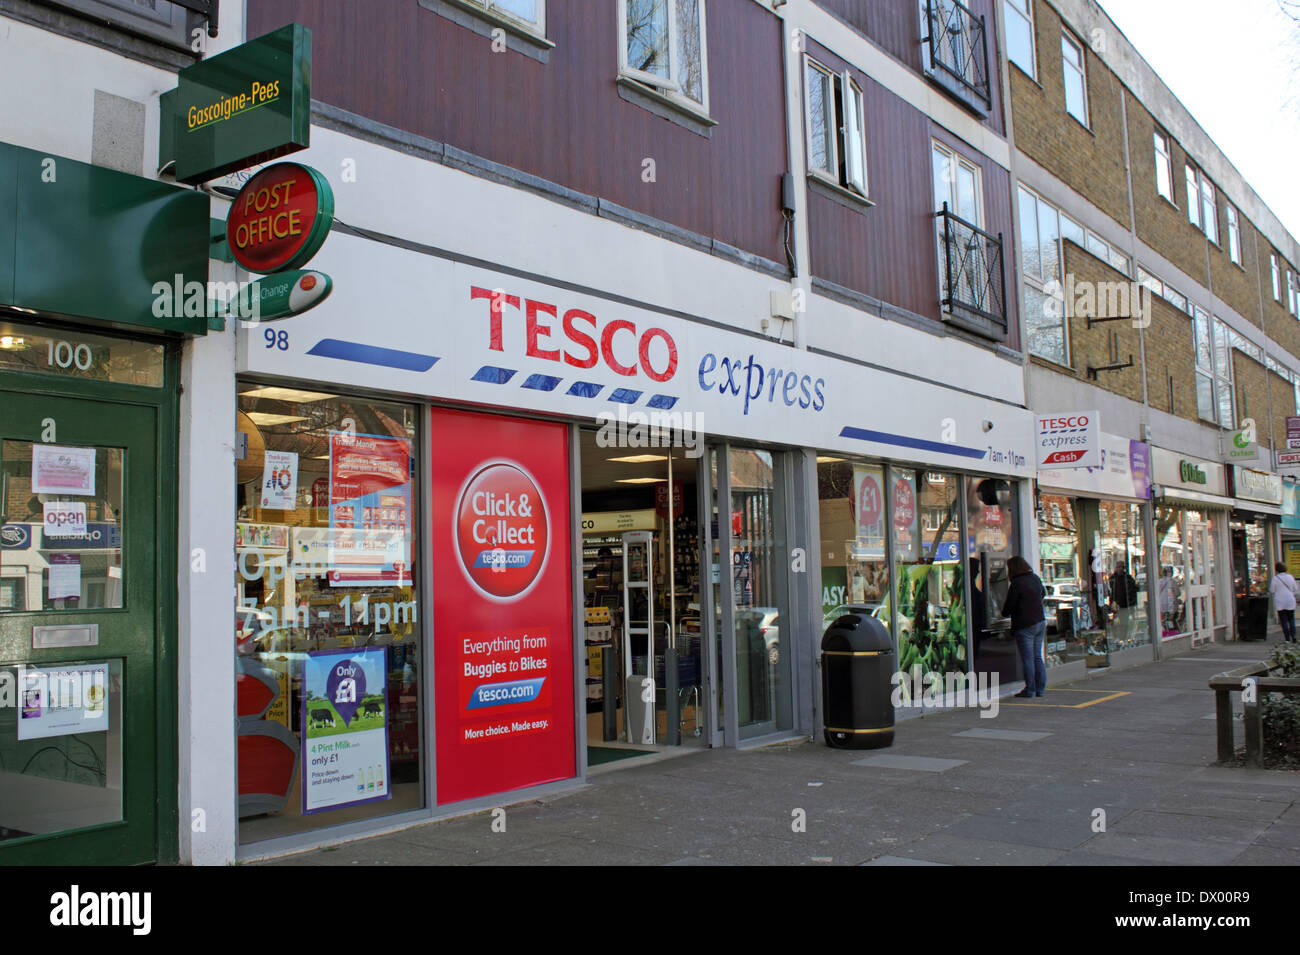 Tesco express store in the High Street Banstead, Surrey, England. Stock Photo